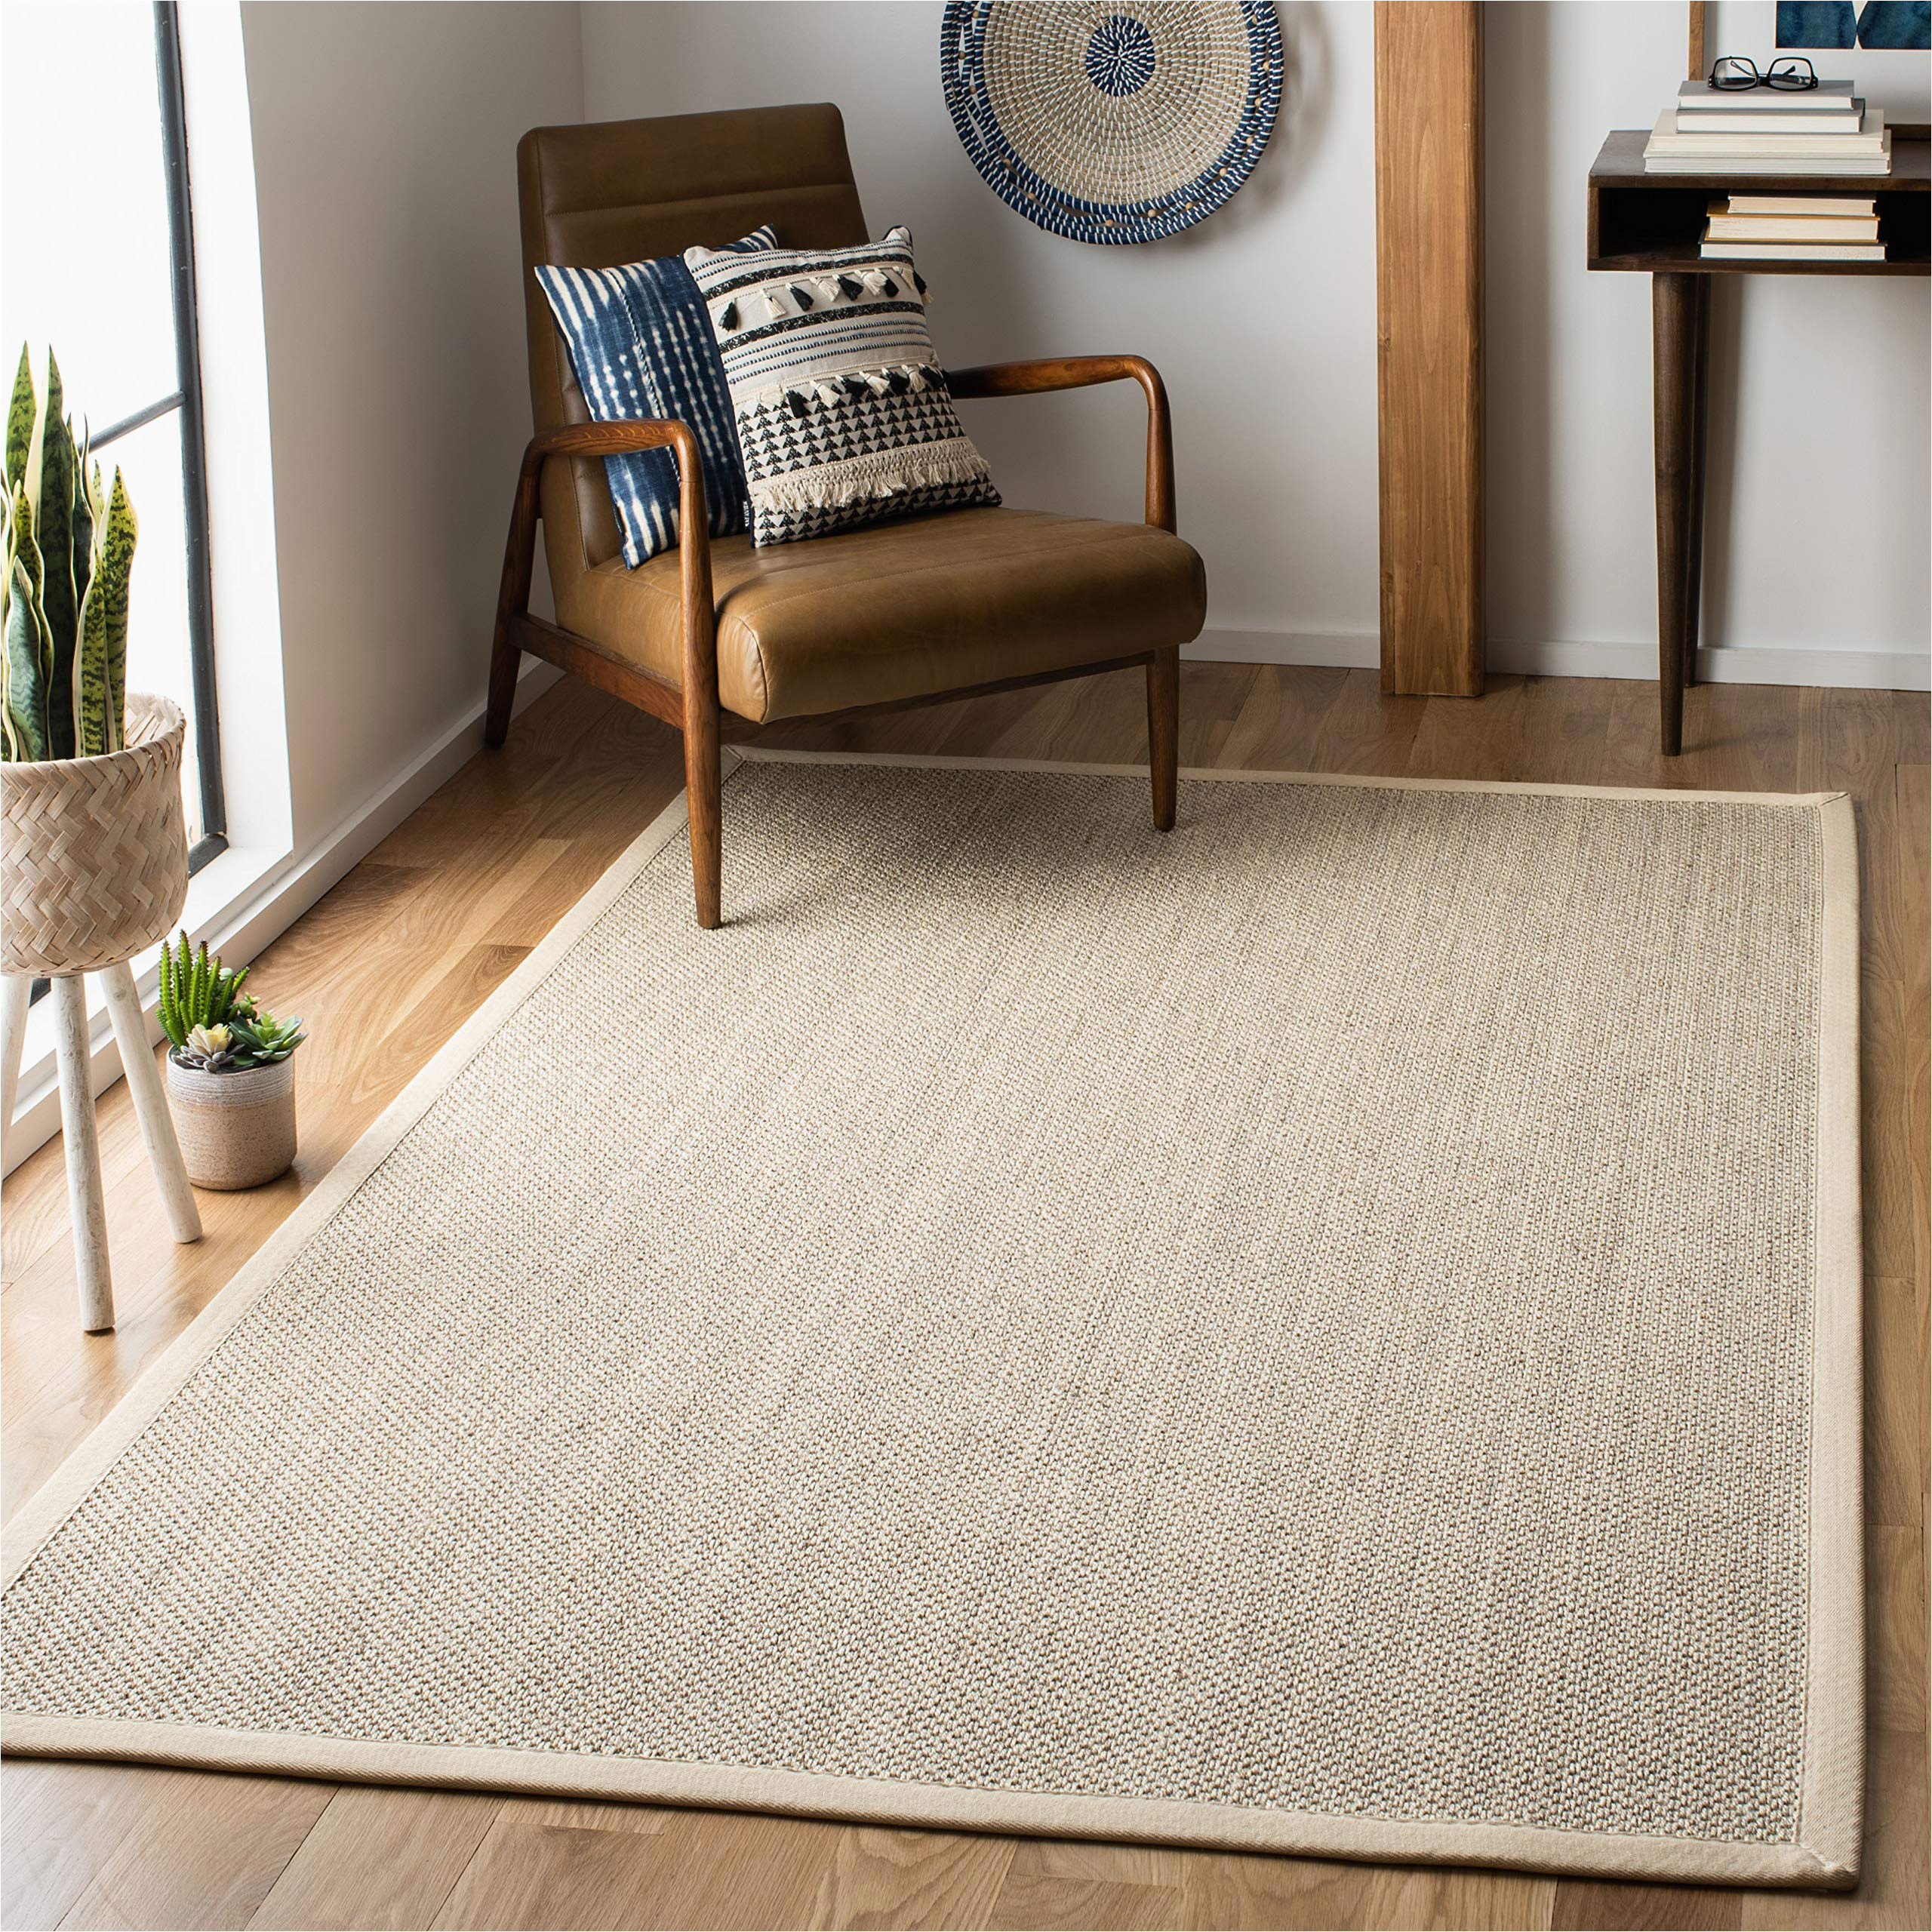 Sisal area Rugs with Borders Safavieh Natural Fiber Collection 8′ X 10′ Marble / Beige Nf143c Border Sisal area Rug